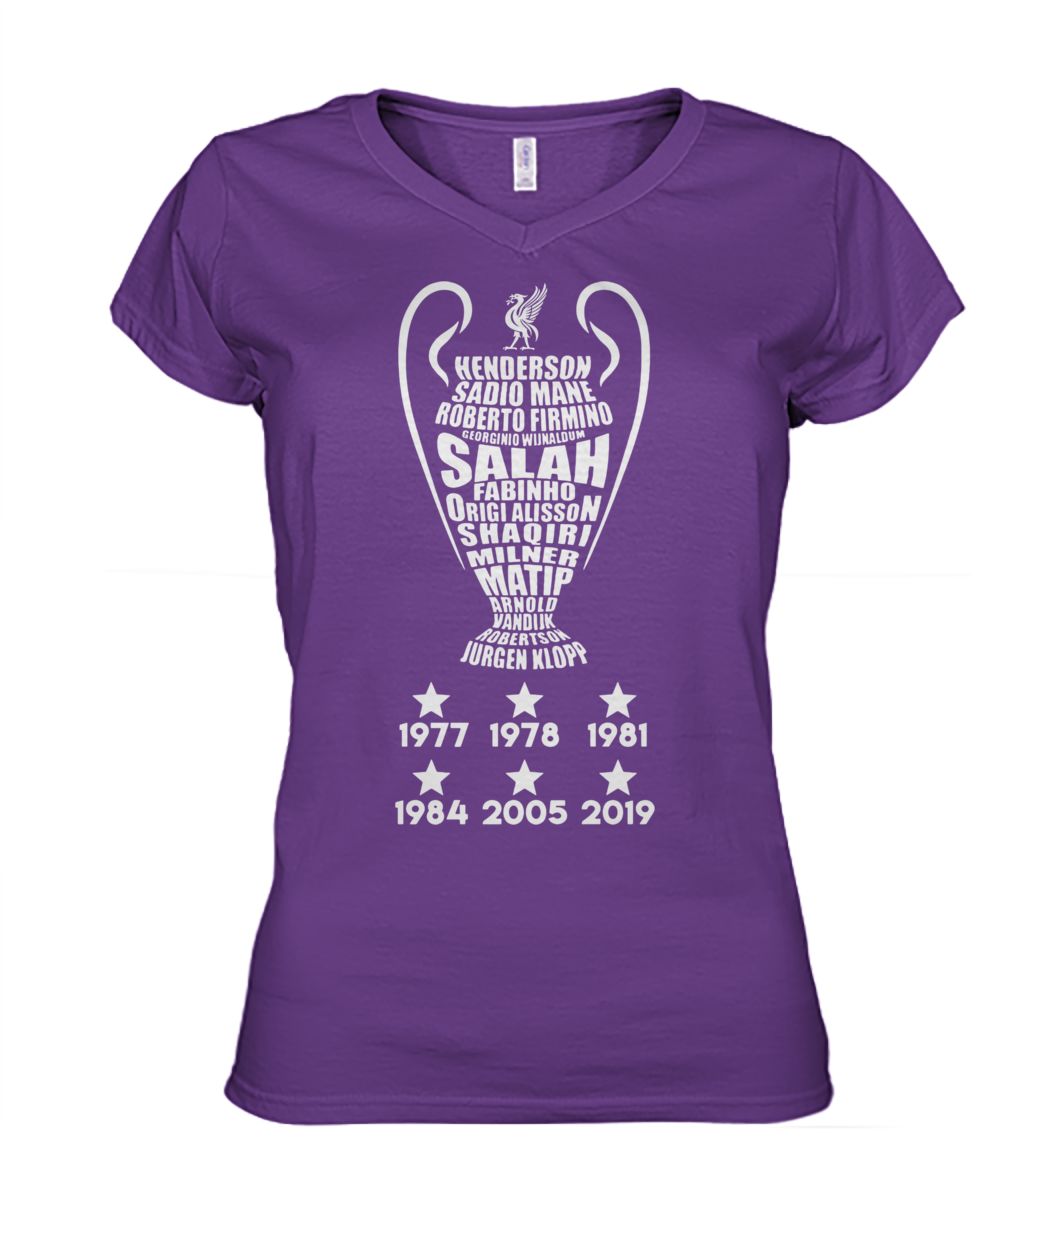 UEFA champions league cup liverpool soccer player's names women's v-neck